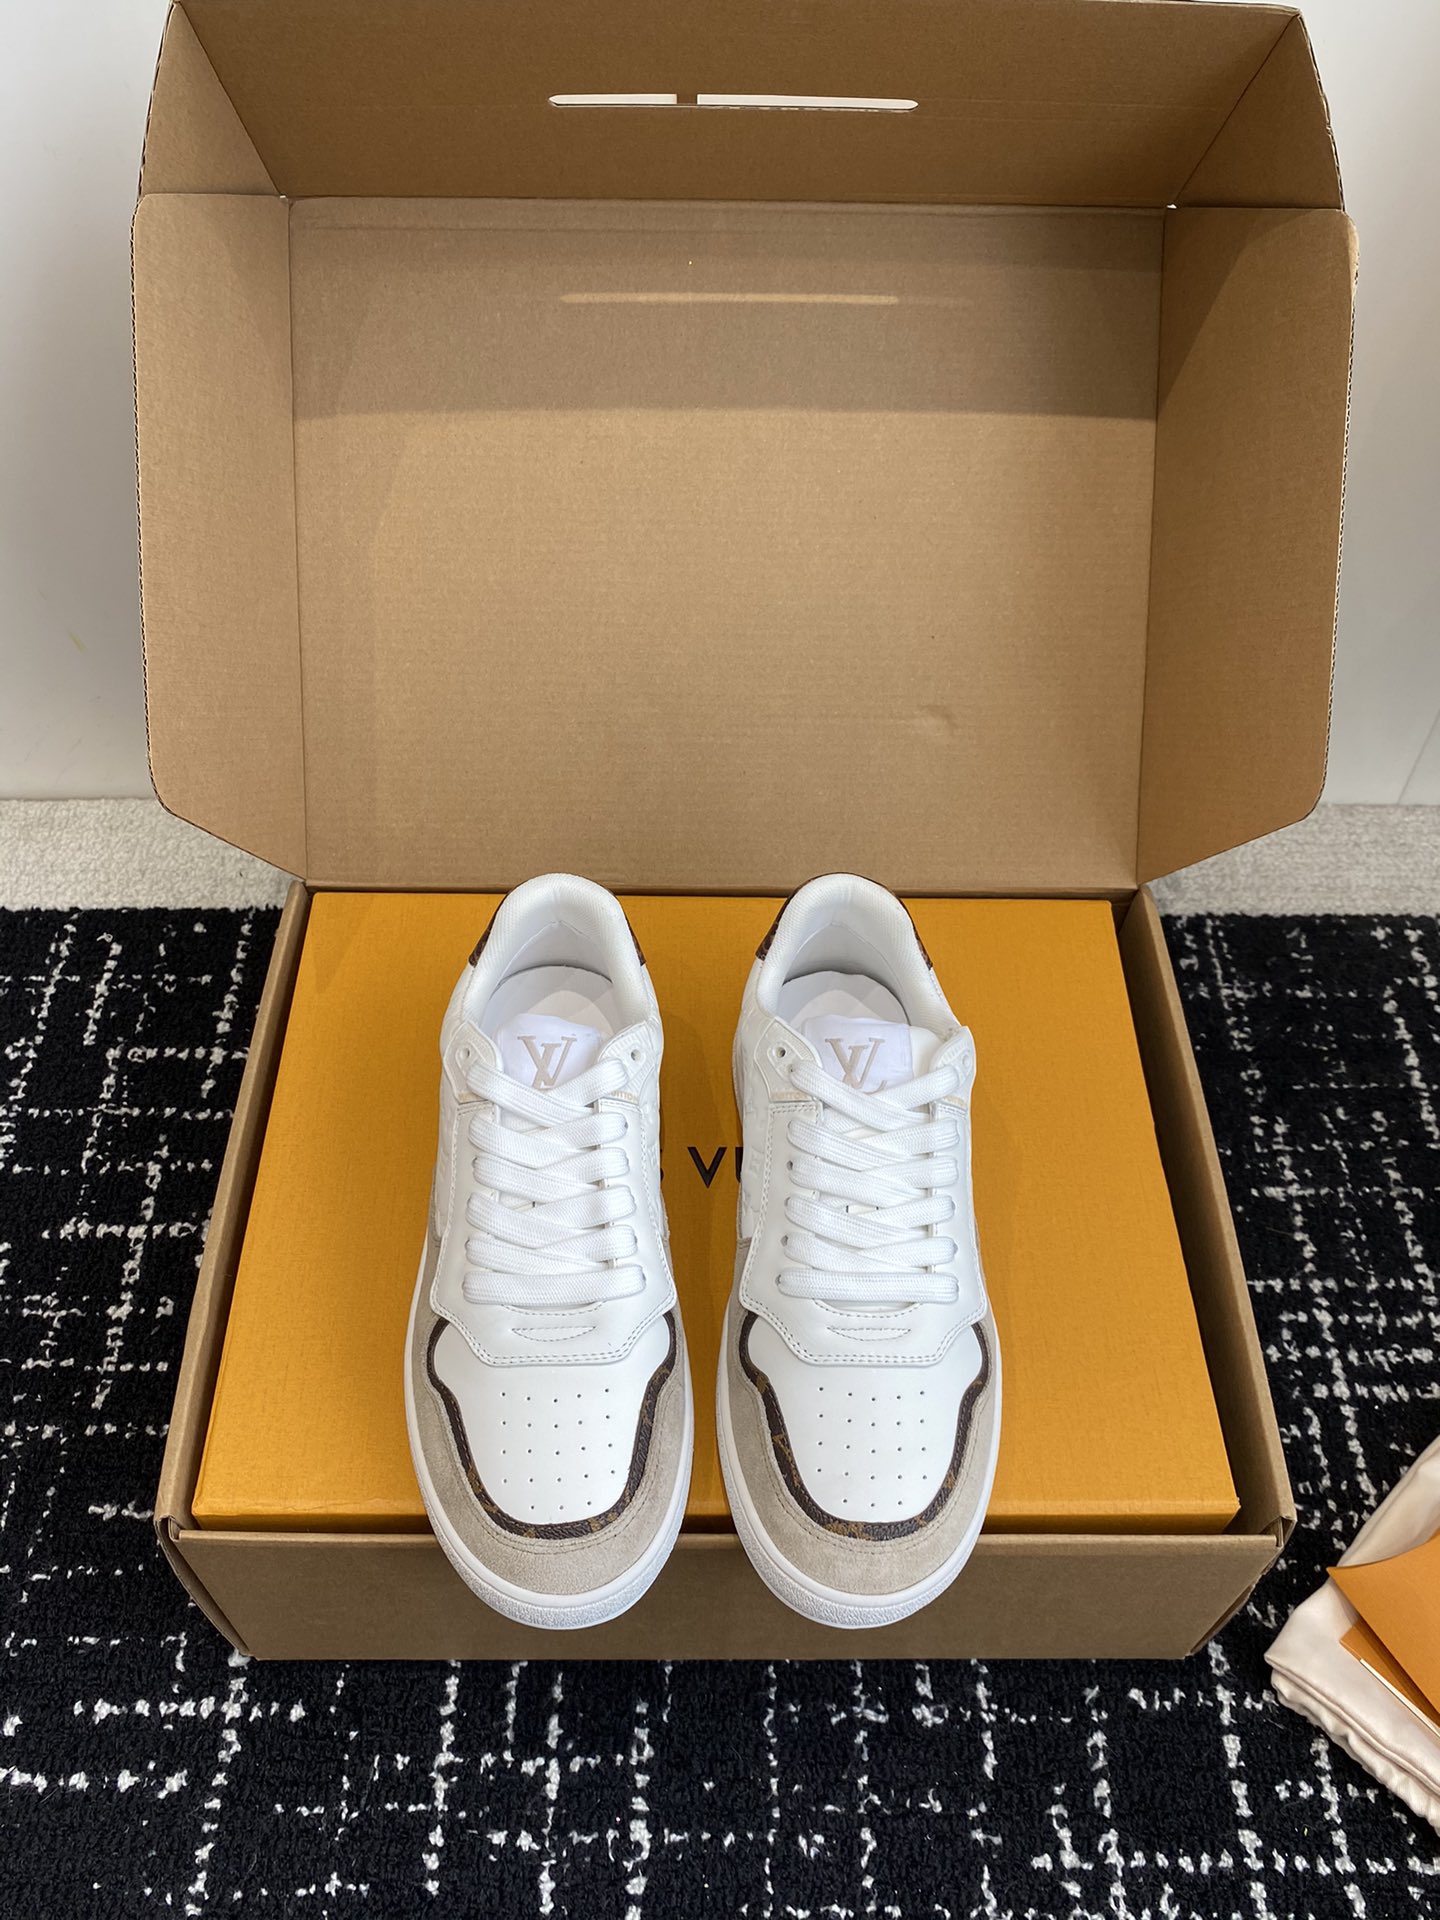 Louis Vuitton Skateboard Shoes Sneakers Casual Shoes White Unisex Women Men Cowhide Nylon Spring/Summer Collection Casual